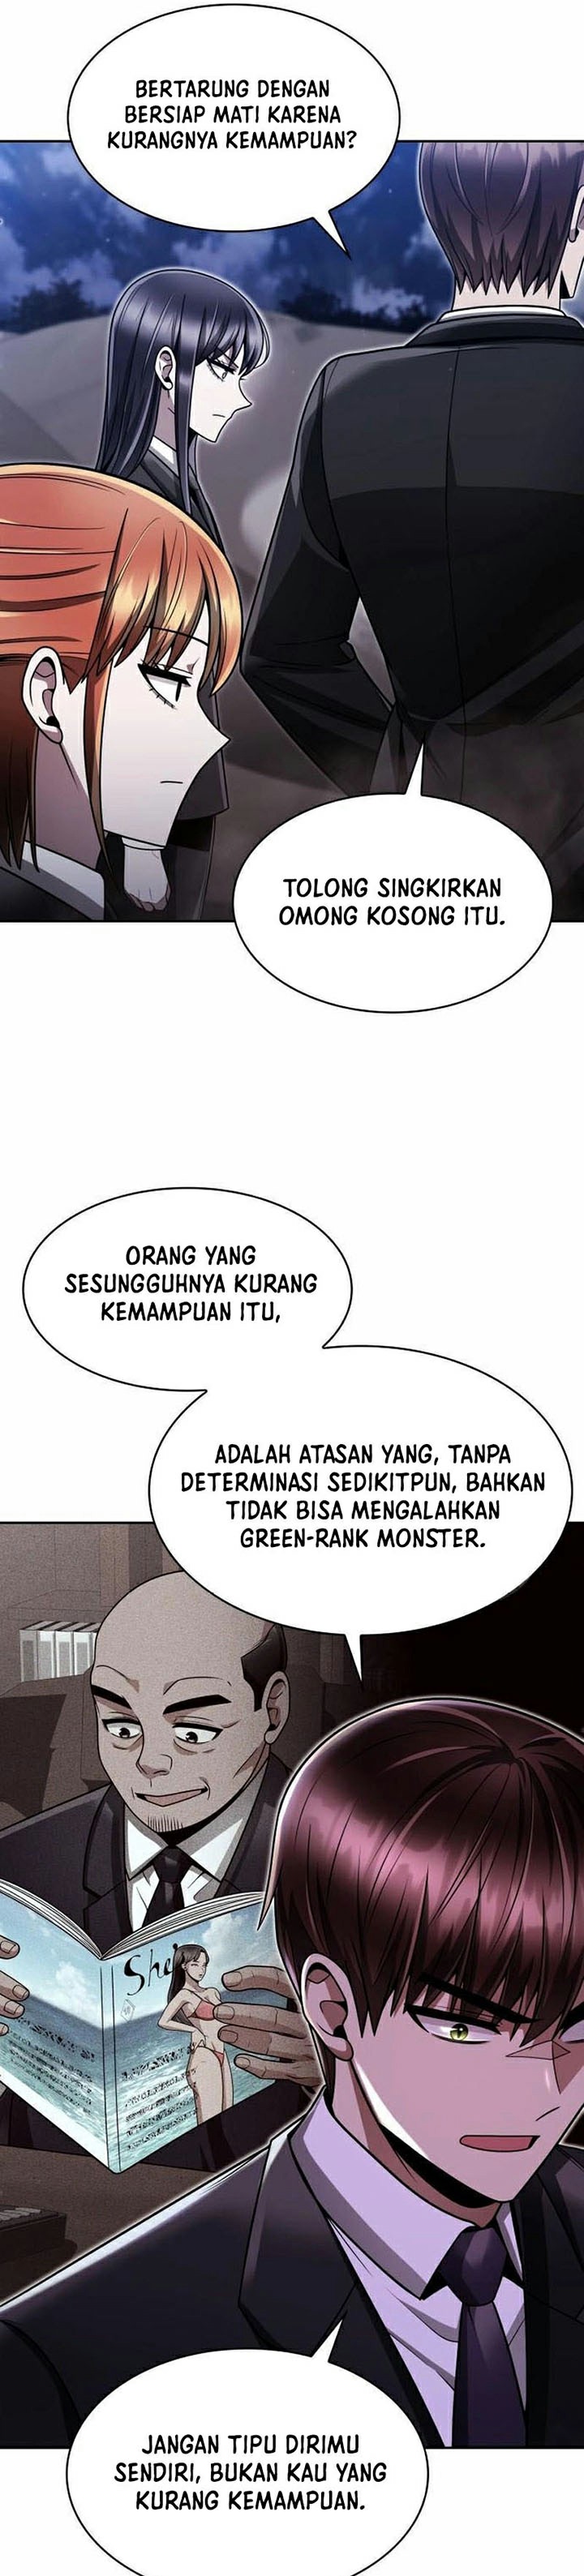 Dilarang COPAS - situs resmi www.mangacanblog.com - Komik clever cleaning life of the returned genius hunter 060 - chapter 60 61 Indonesia clever cleaning life of the returned genius hunter 060 - chapter 60 Terbaru 23|Baca Manga Komik Indonesia|Mangacan